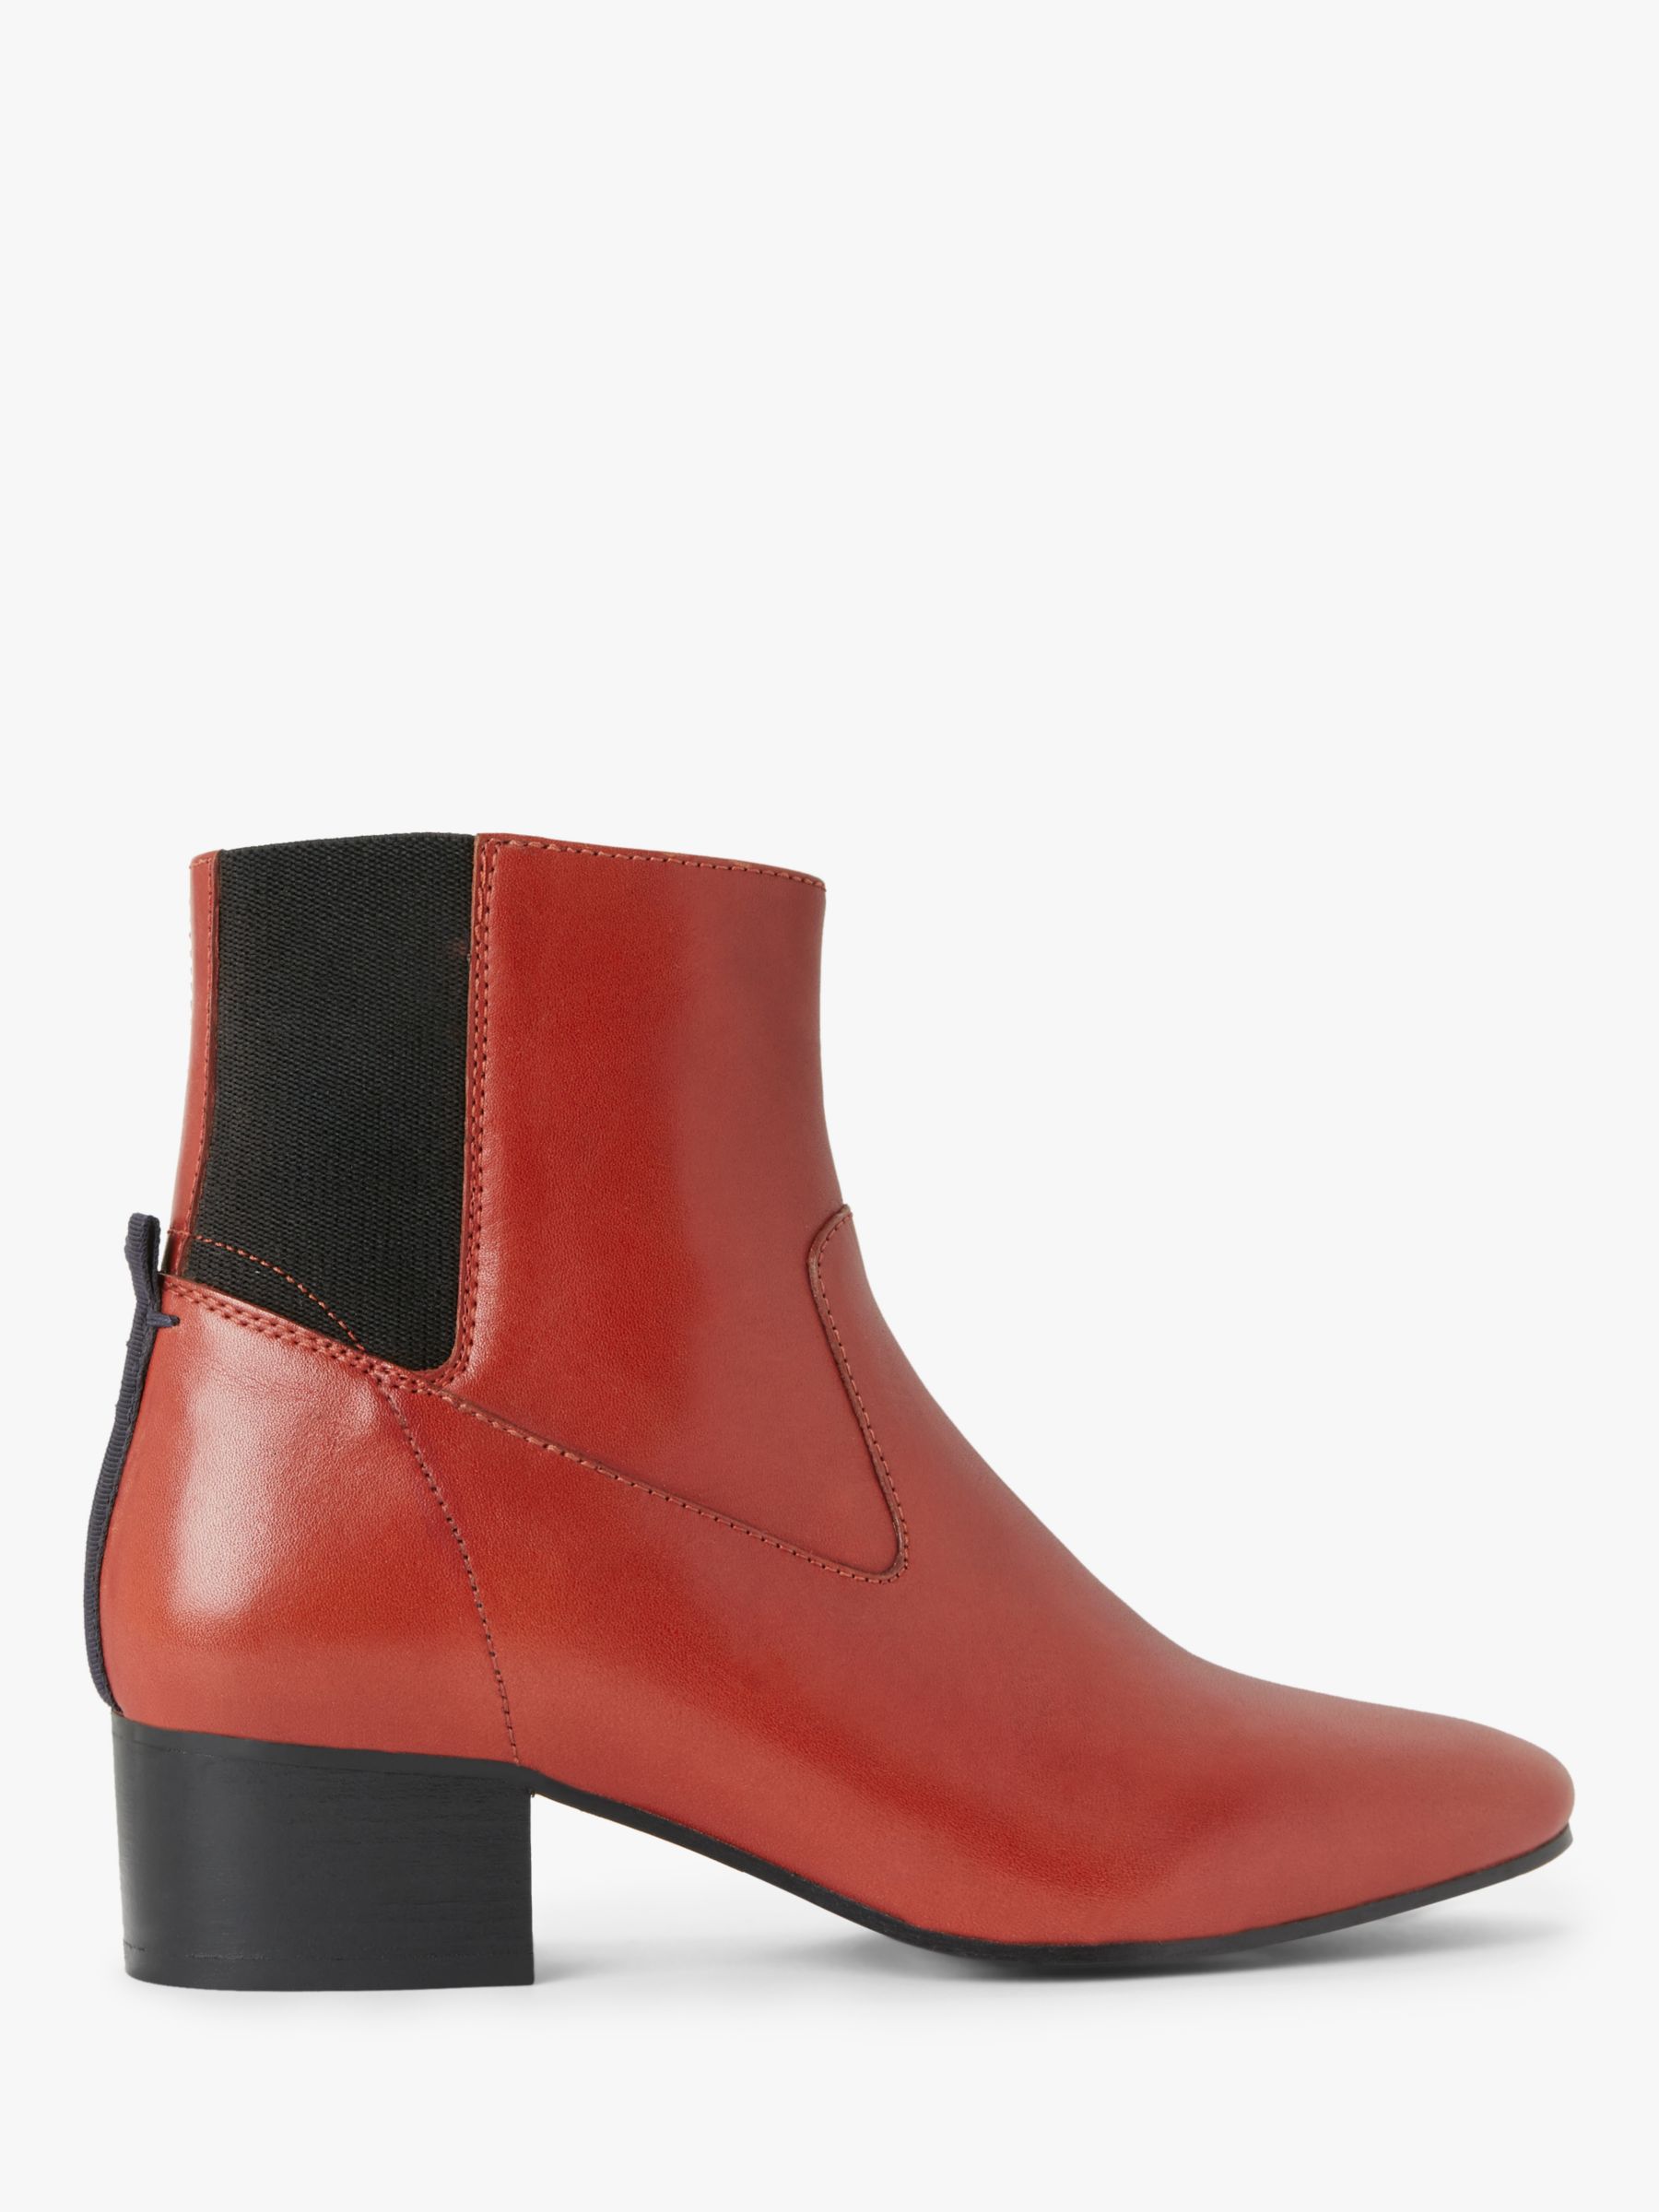 Kin Peaches Leather Ankle Boots, Orange at John Lewis & Partners